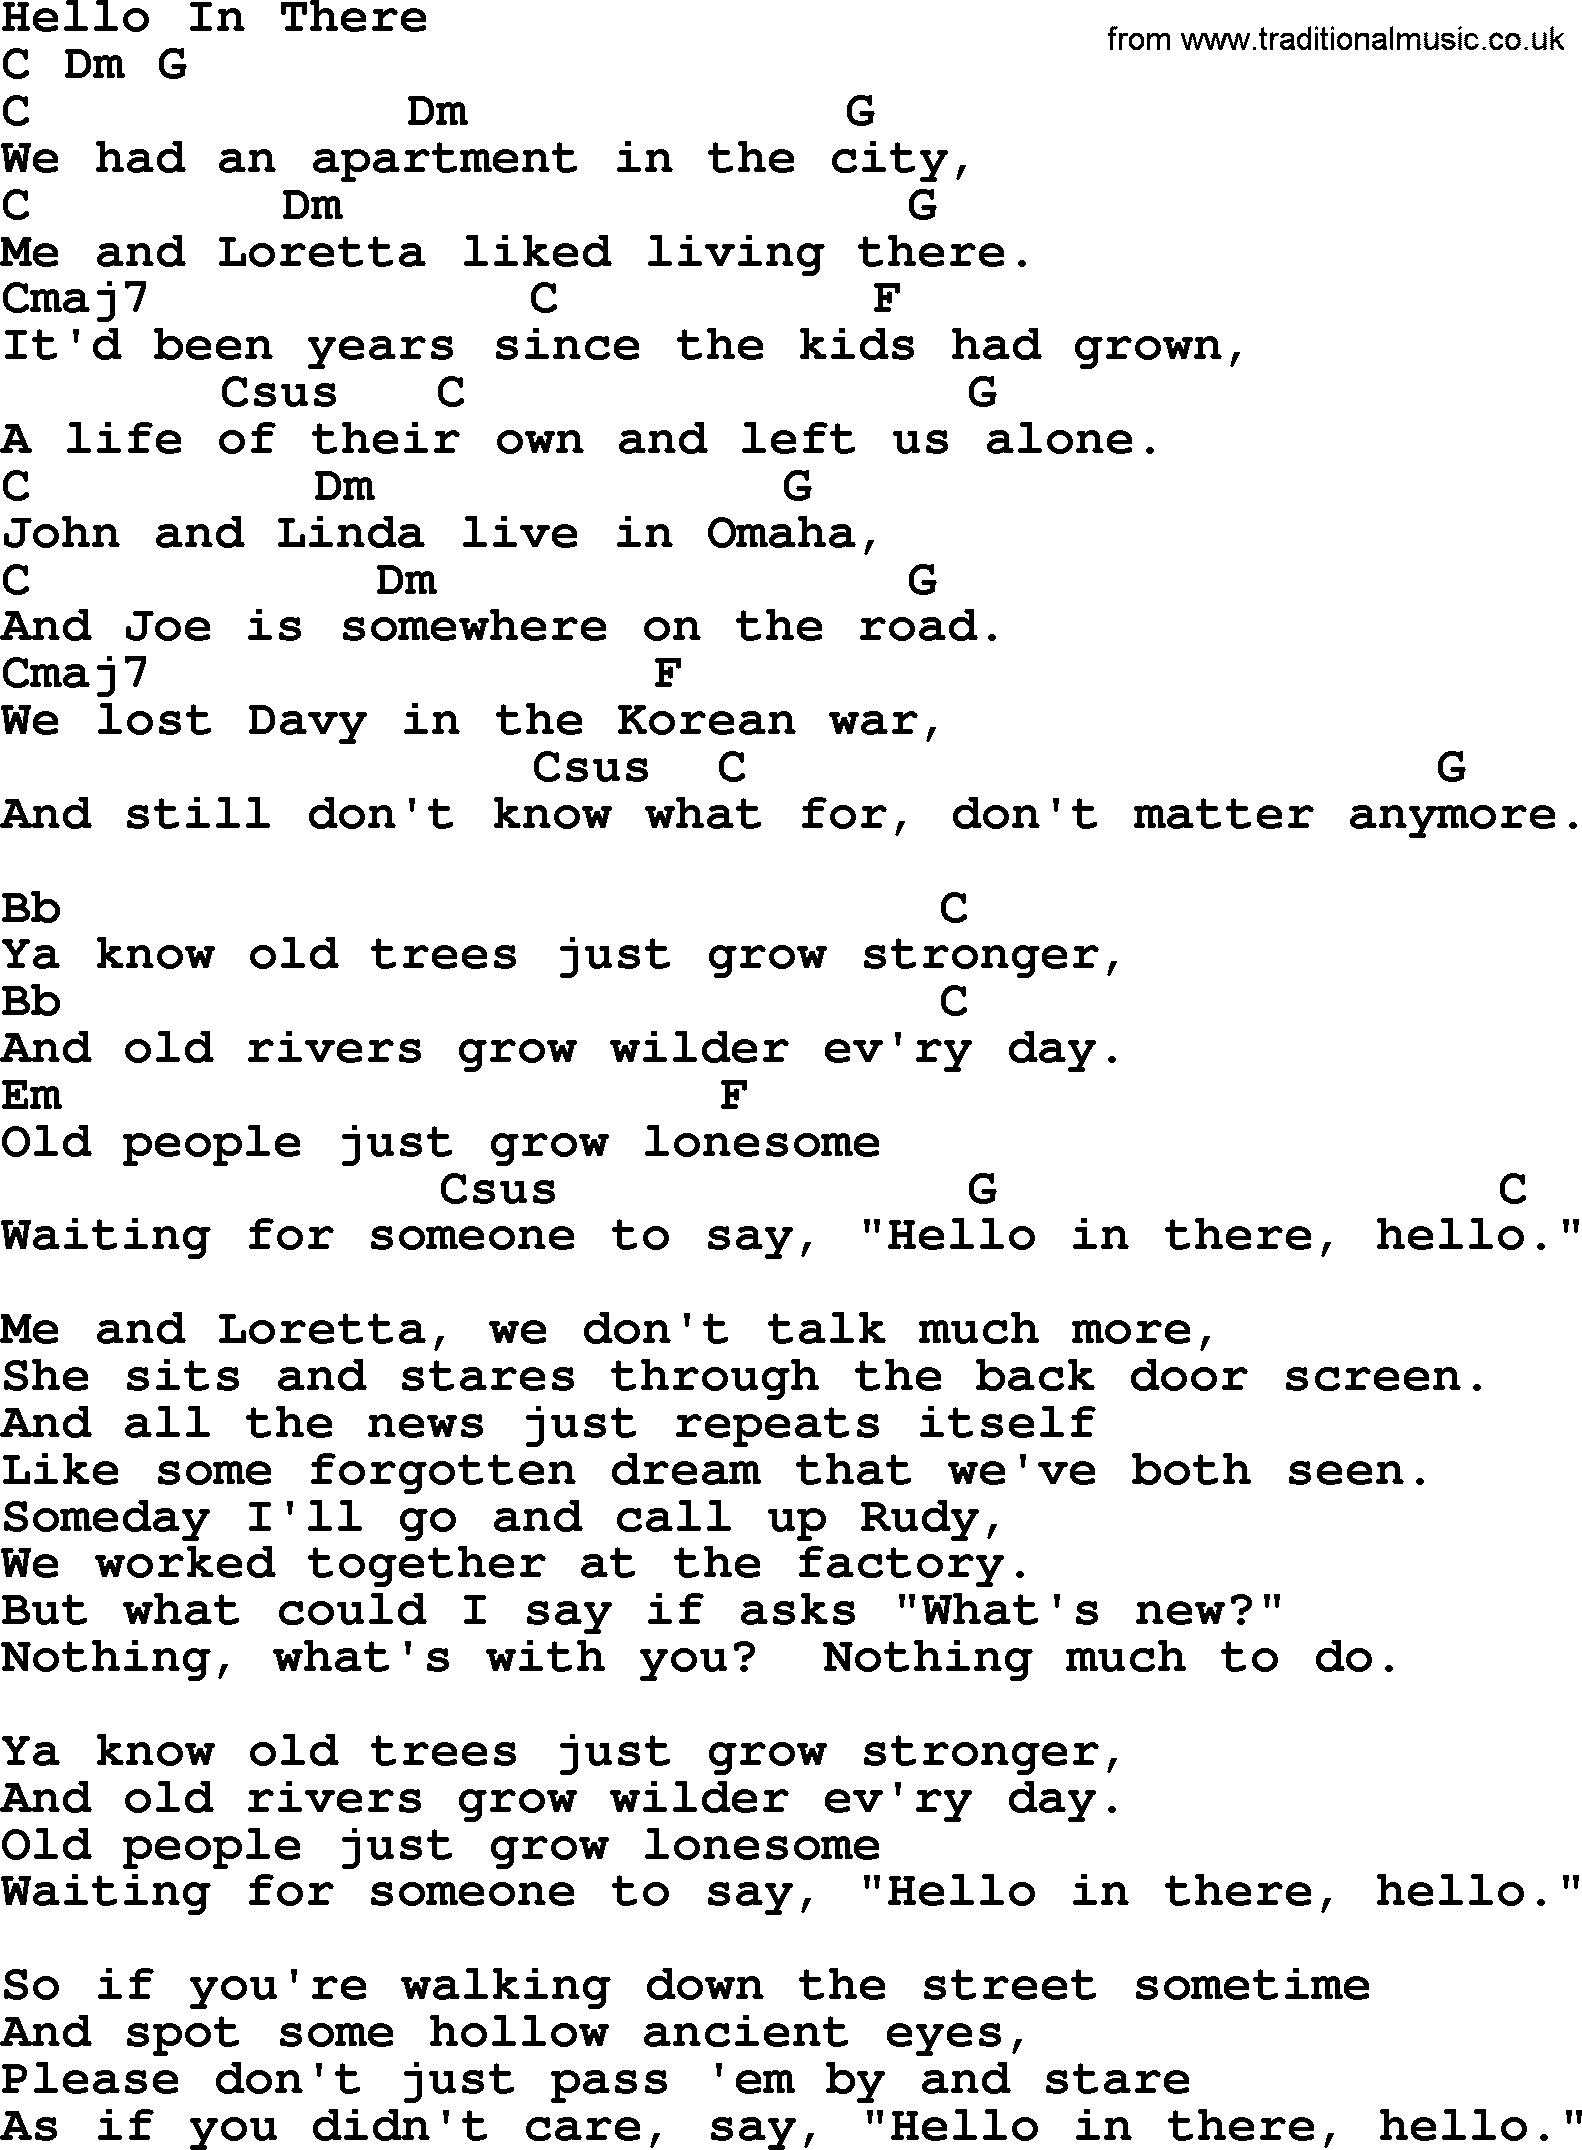 Bluegrass song: Hello In There, lyrics and chords